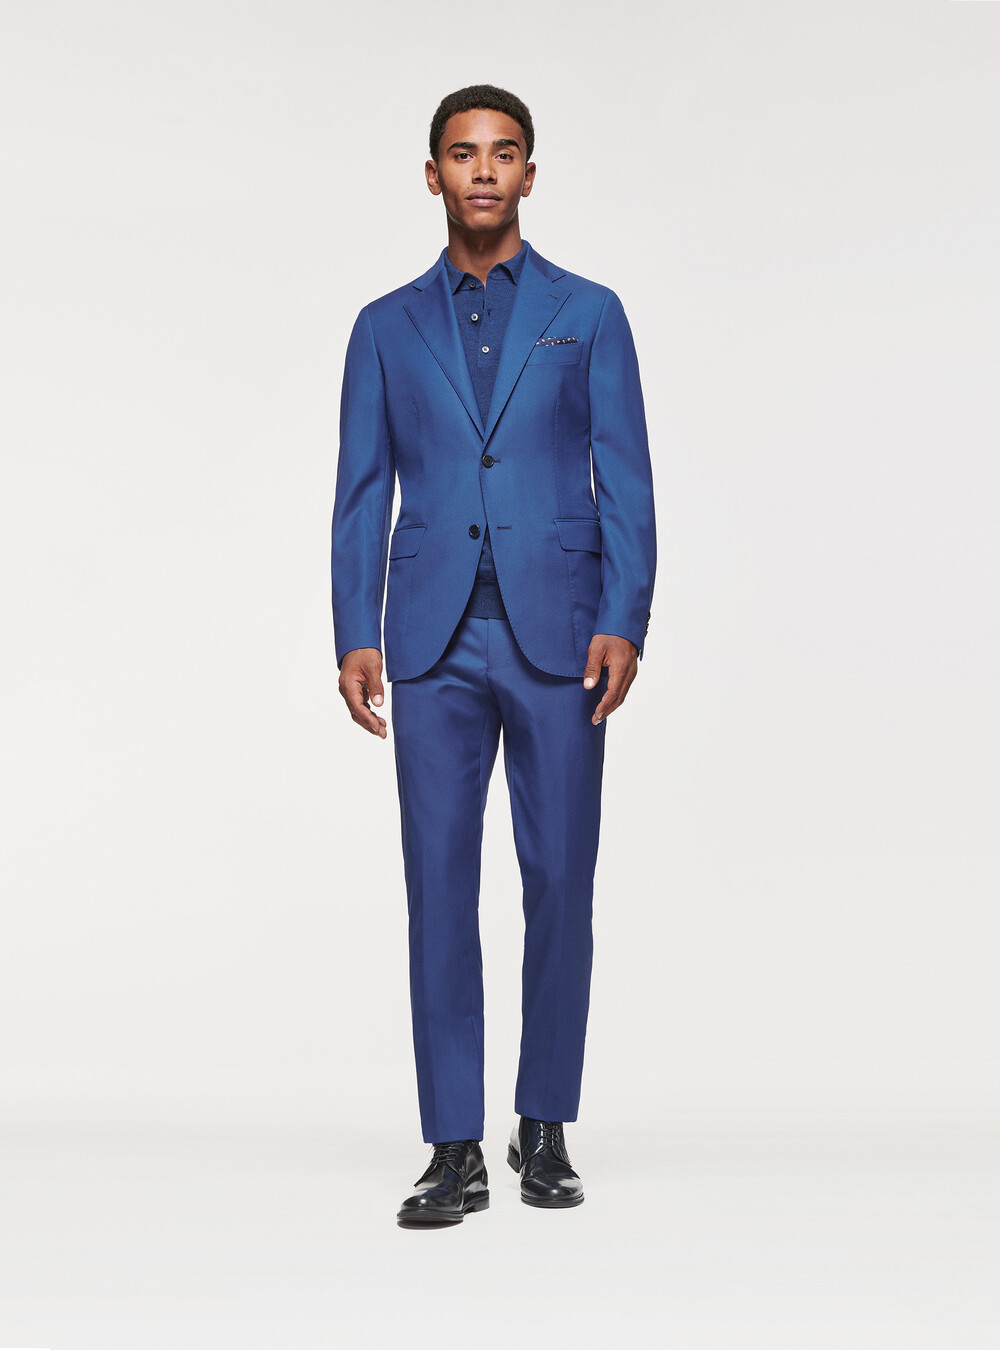 VBC royal blue suit in 110s pure superfine wool